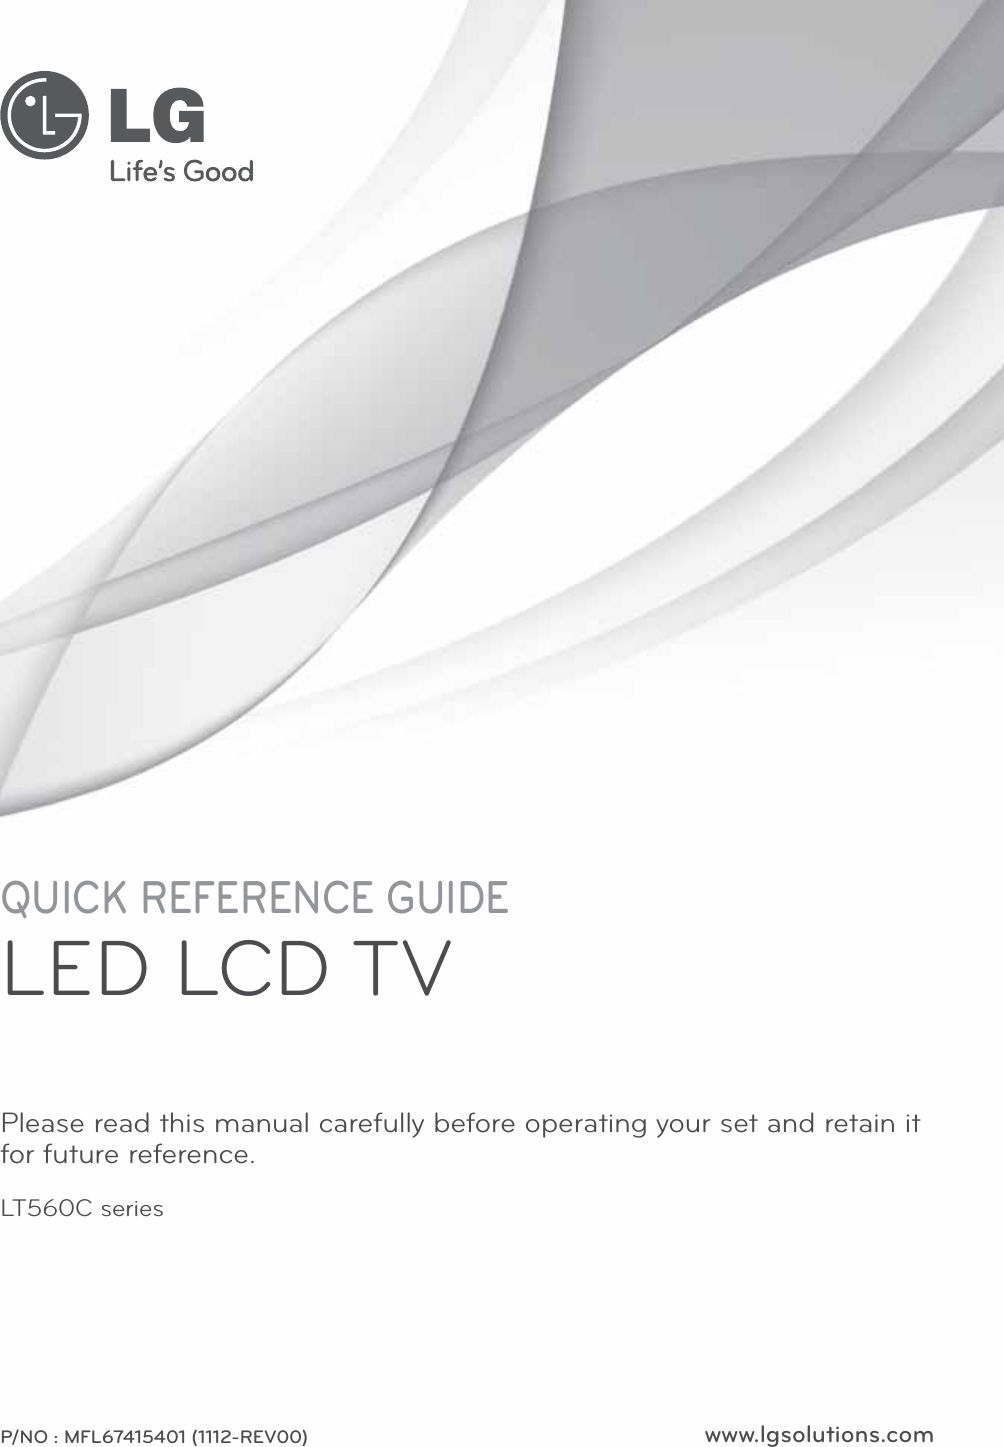 www.lgsolutions.comQUICK REFERENCE GUIDELED LCD TVPlease read this manual carefully before operating your set and retain it for future reference.P/NO : MFL67415401 (1112-REV00)LT560C series